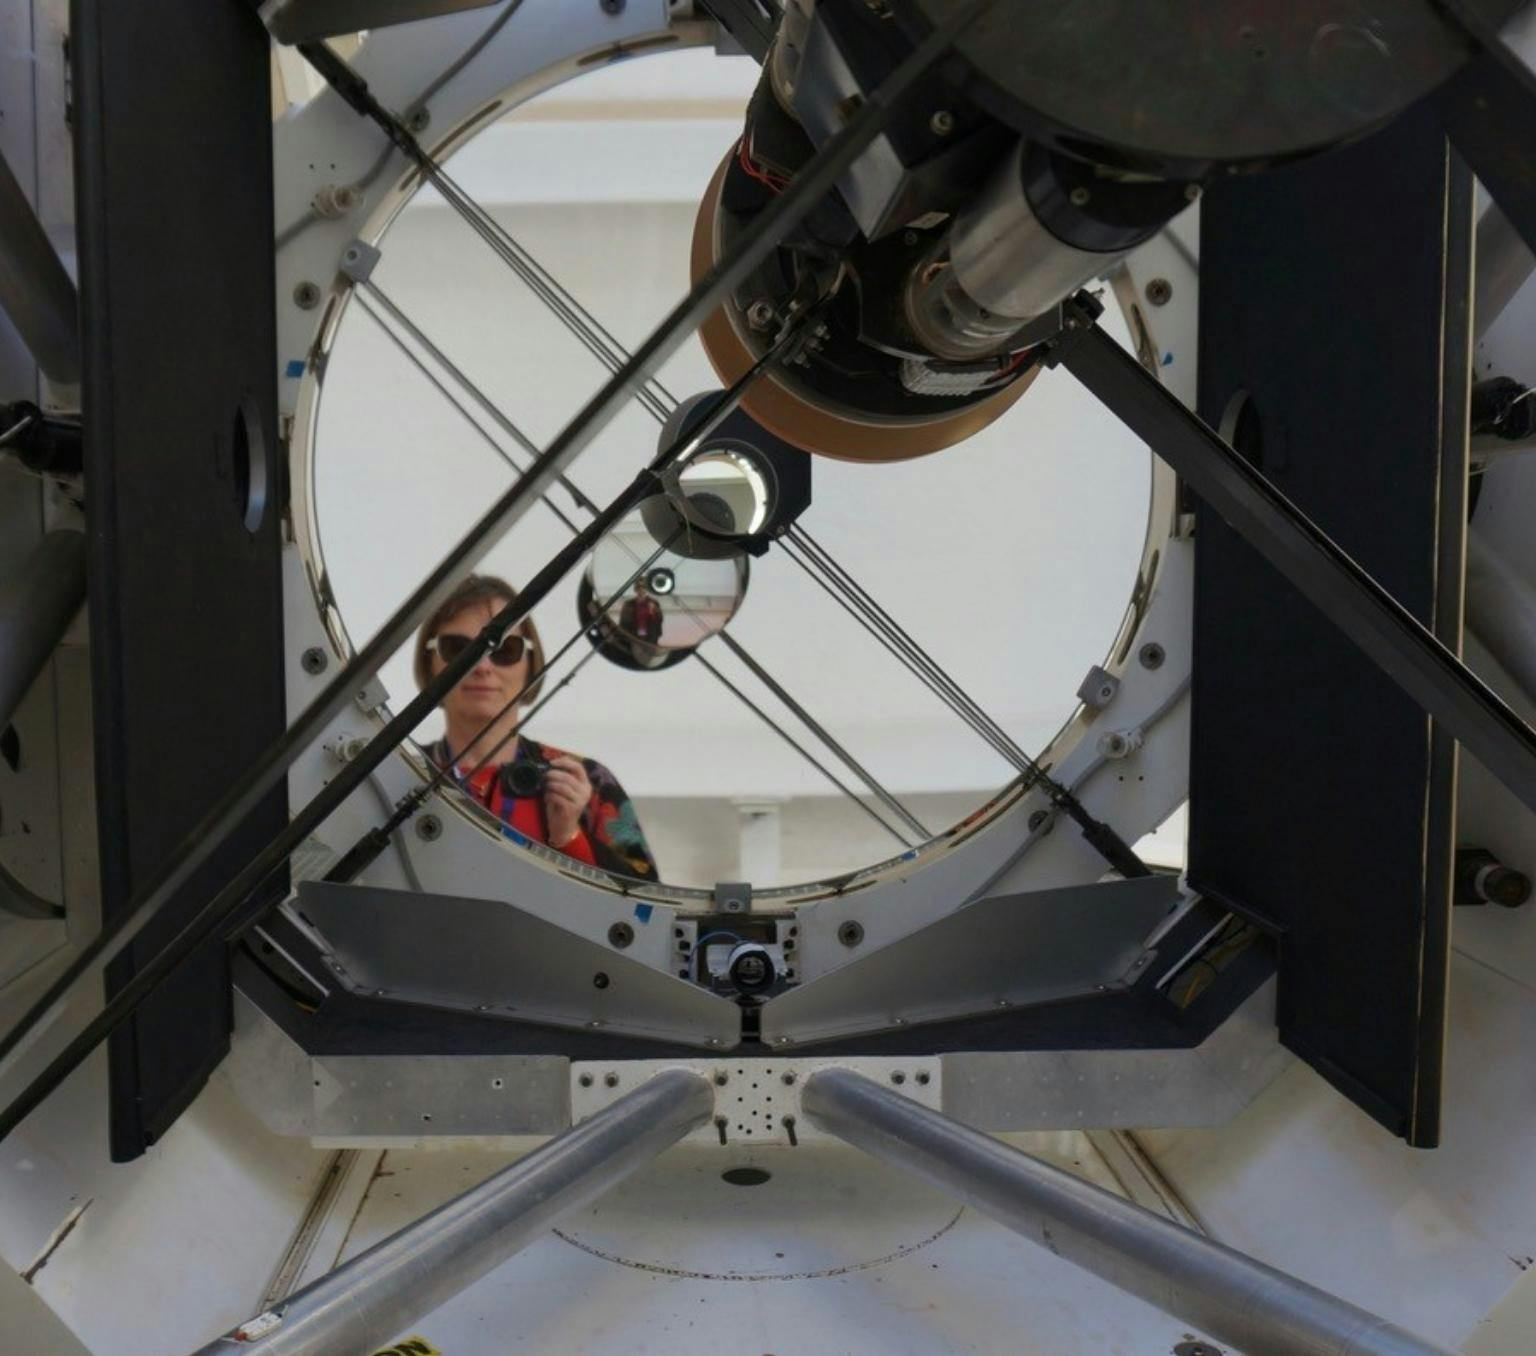 Celine is pictured wearing sunglasses. She is standing behind the EOS 1.8 meter telescope with has a wide circular hole and long metal beams